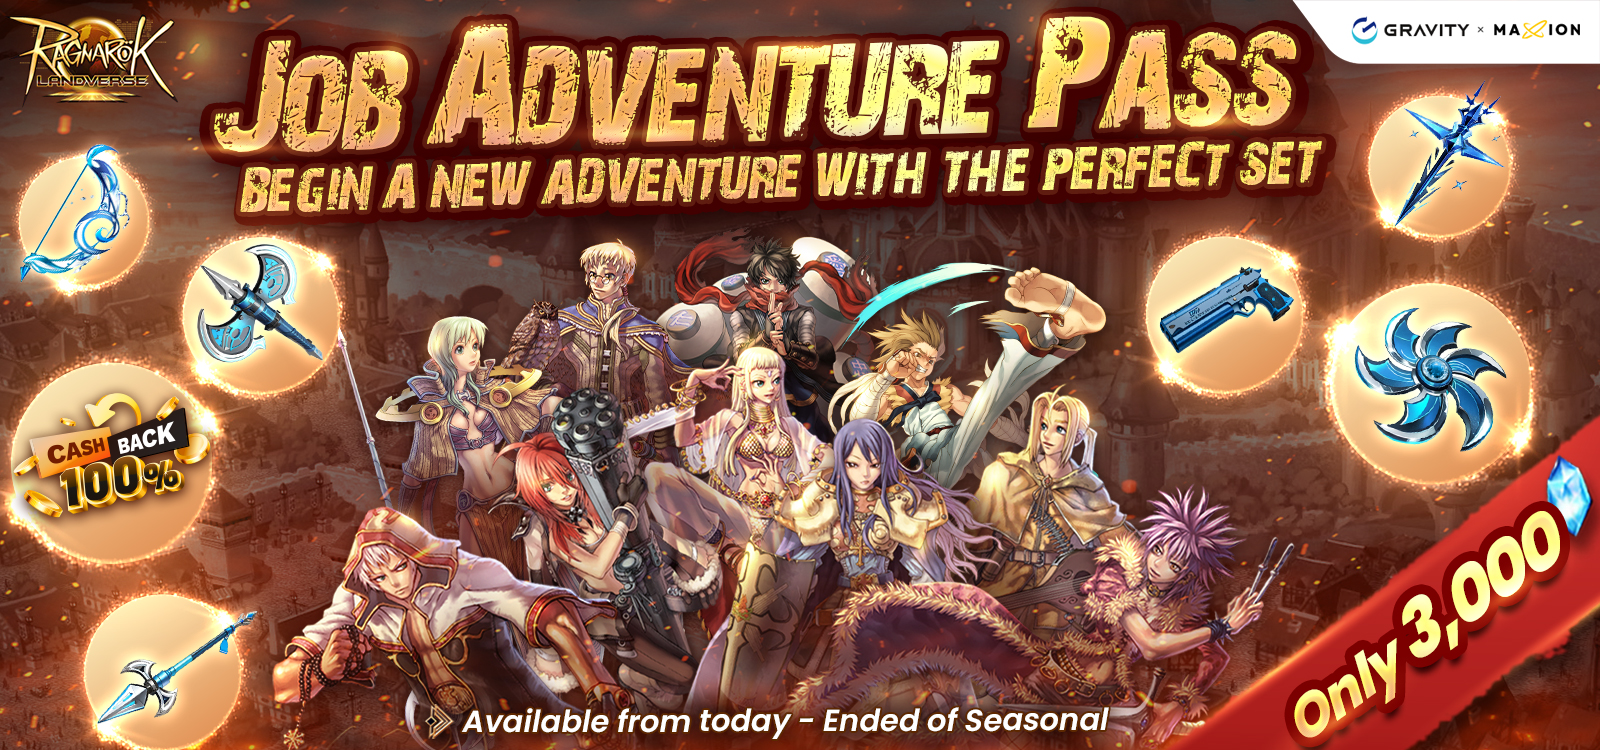 🌟 Job Adventure Pass: Begin a new adventure with the perfect set